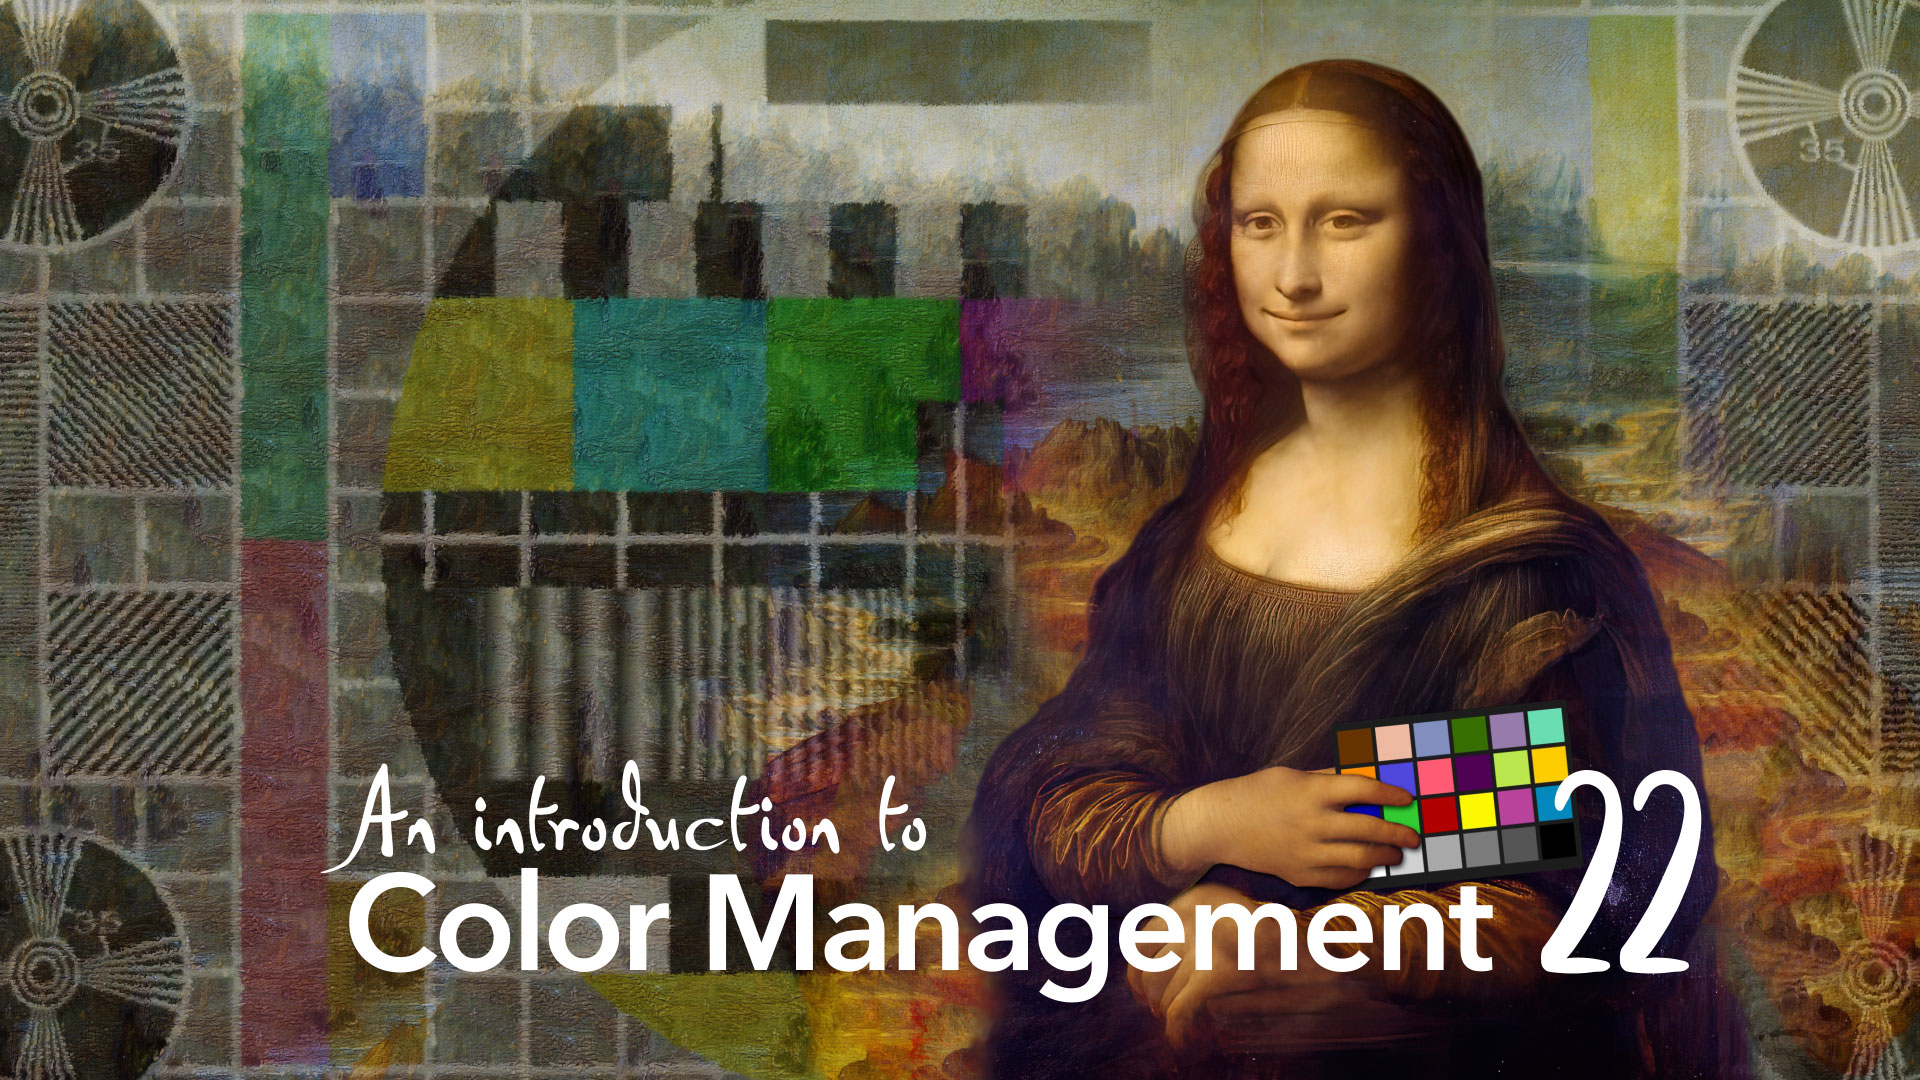 Color Management Part 22: Introducing Tone Mapping 5